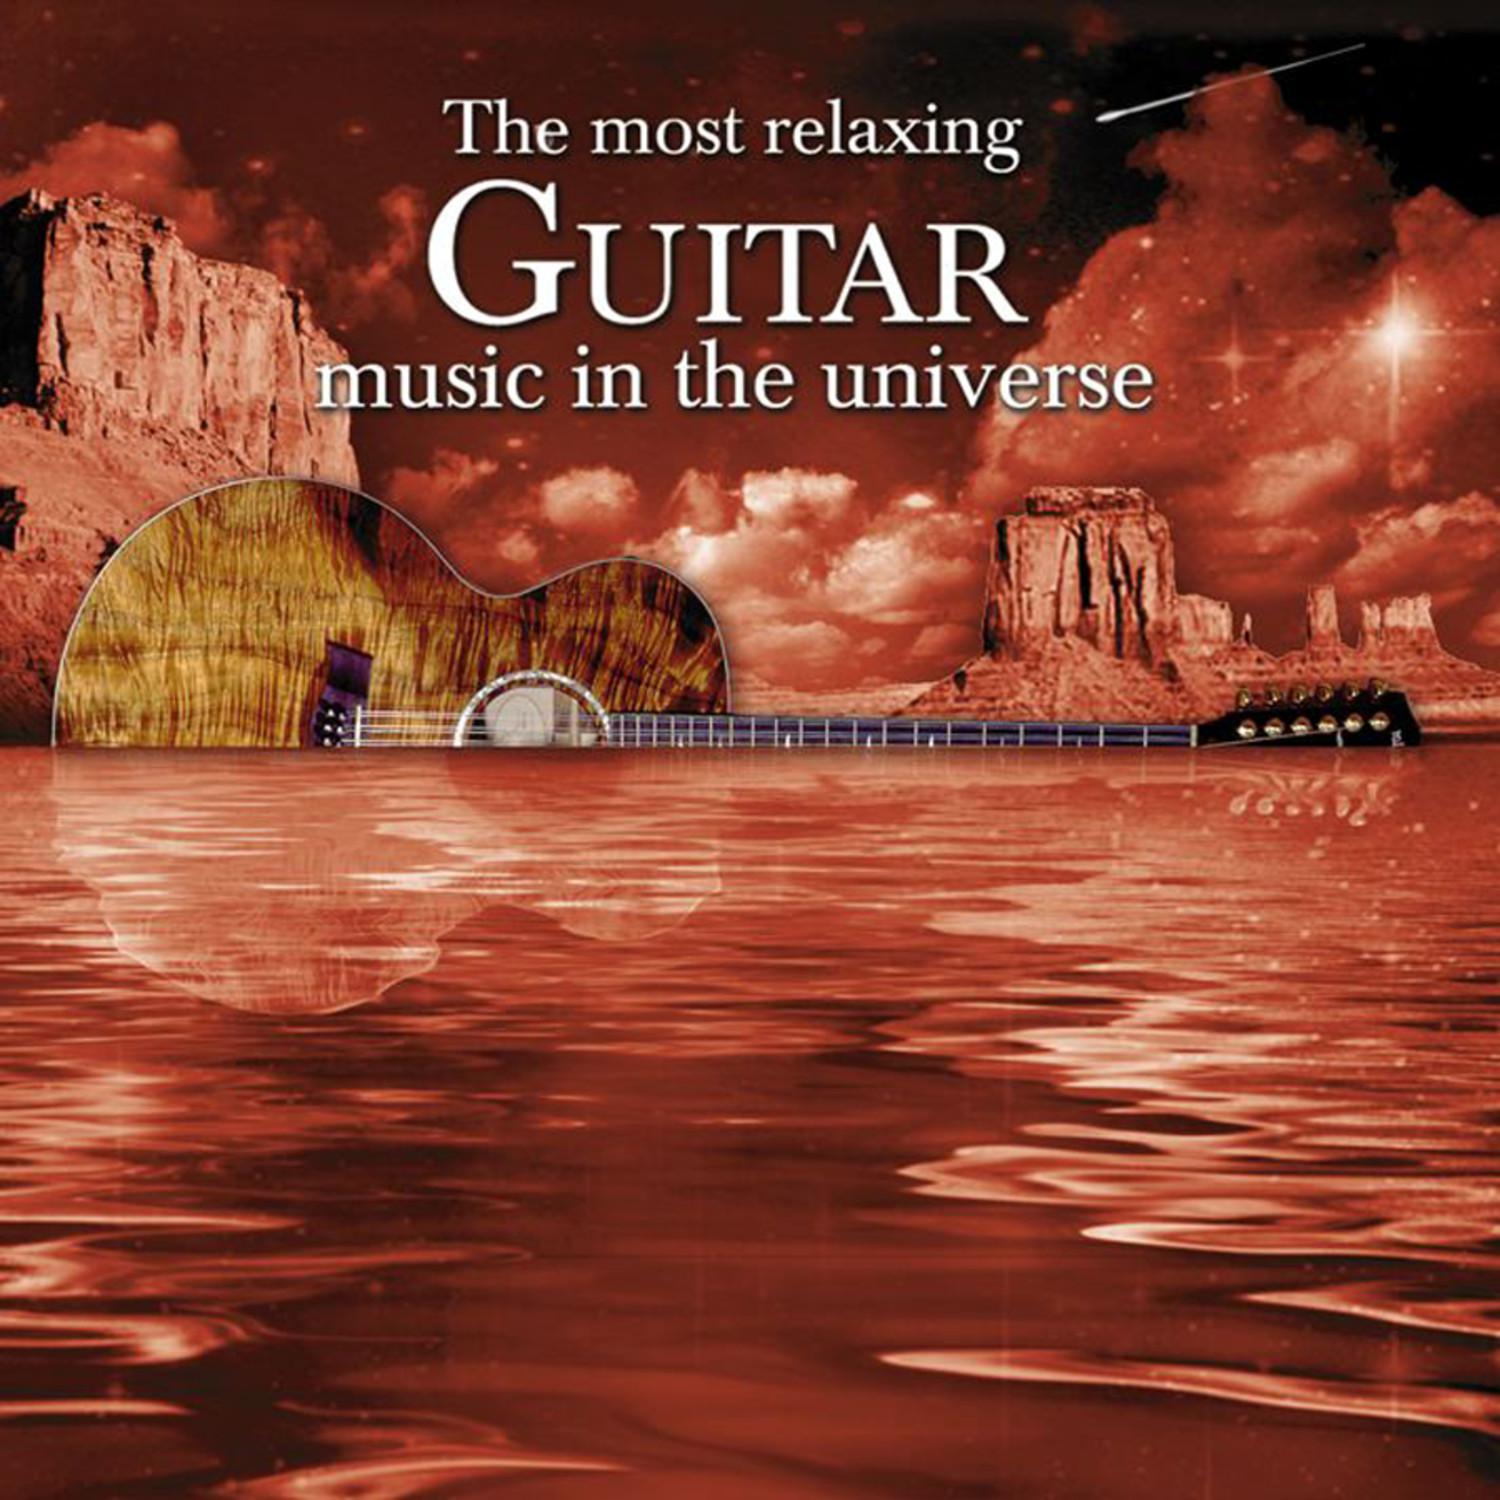 Variations and 12 Minuets for Guitar, Op. 11: Minuet no 4